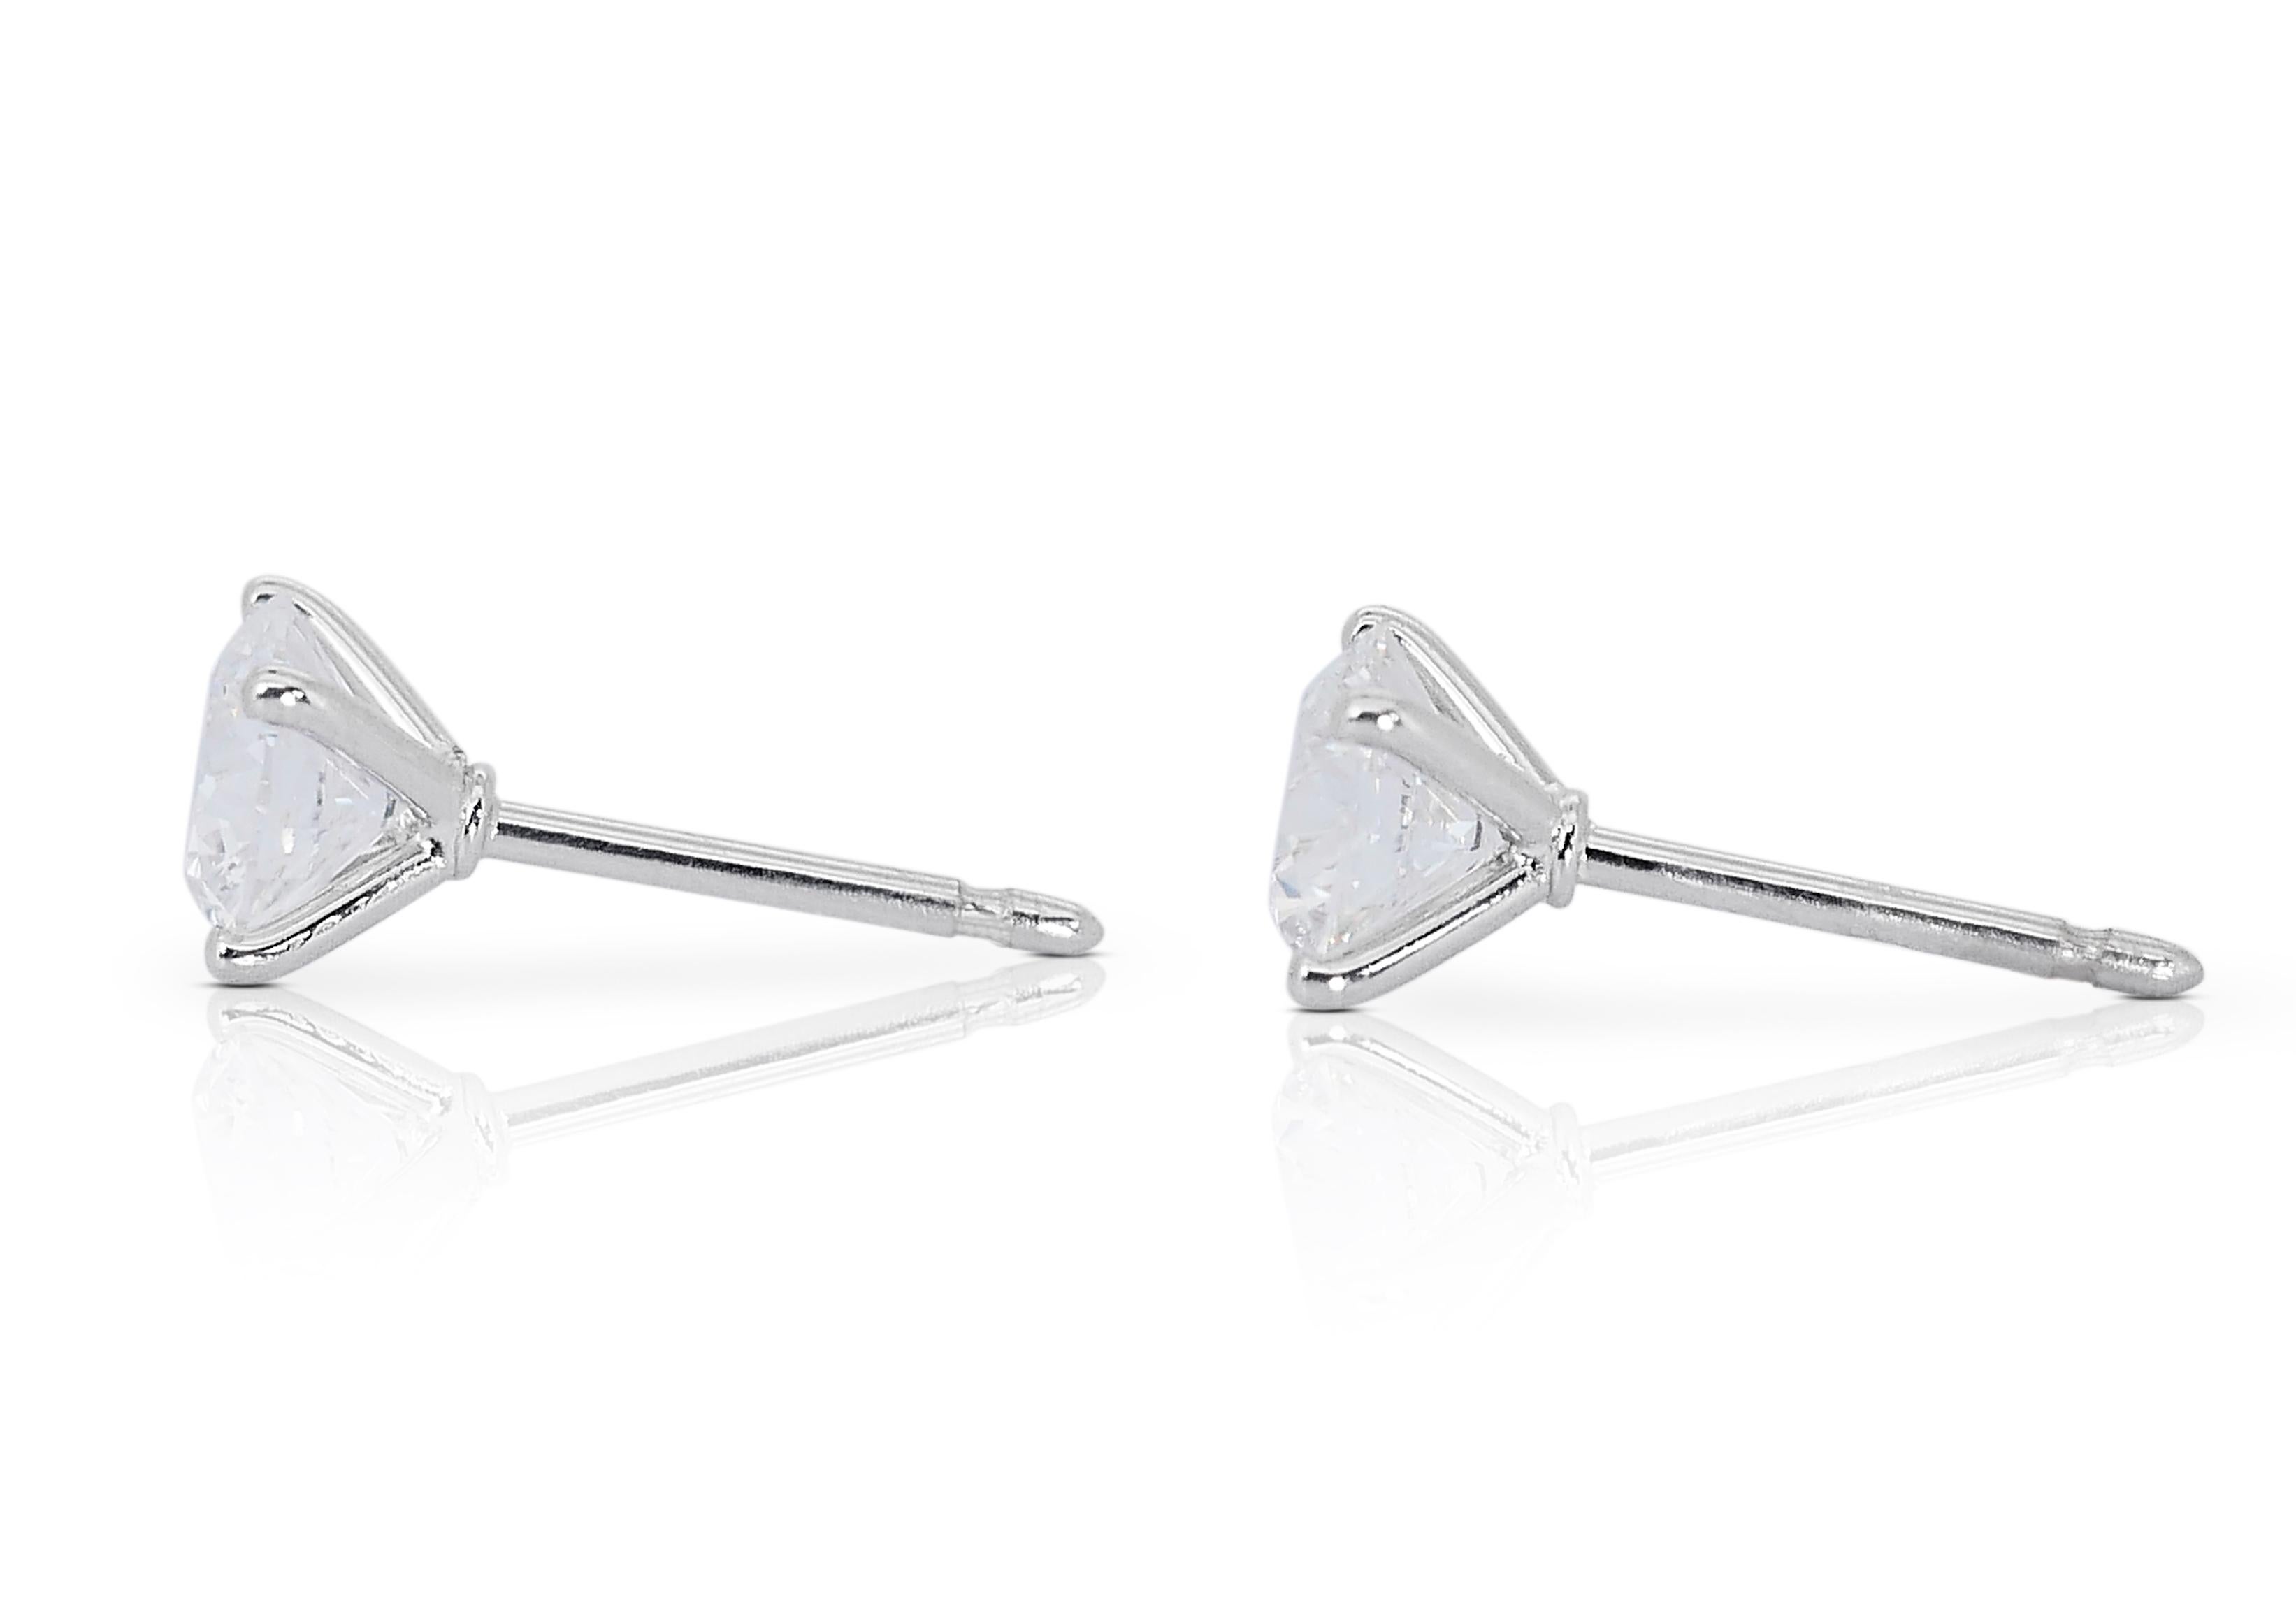 Spectacular 2.06ct Diamond Stud Earrings in 18k White Gold - GIA Certified For Sale 1